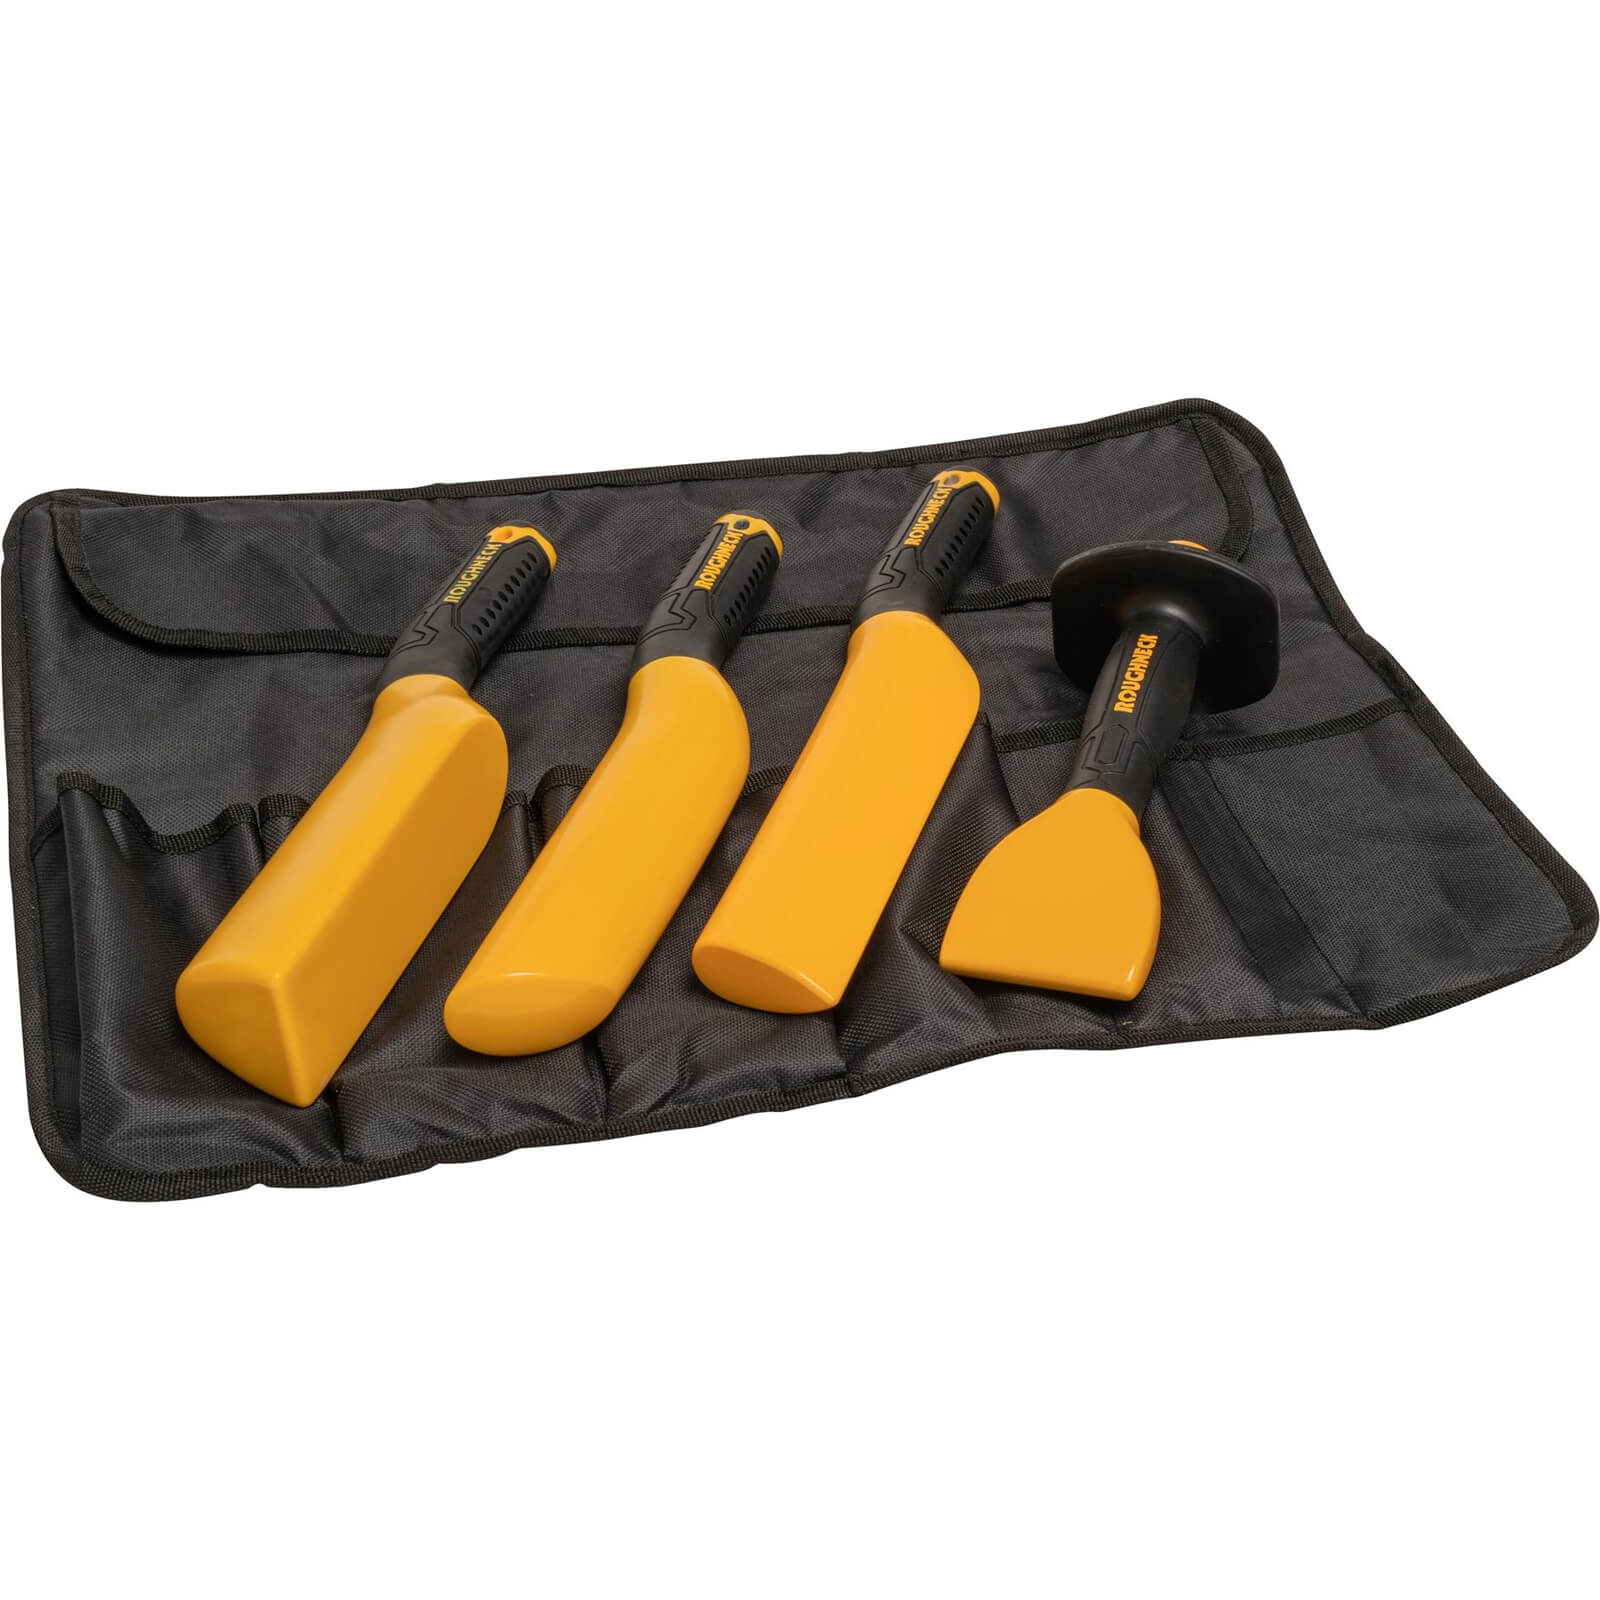 Photos - Other Hand Tools Roughneck Pro 4 Piece Lead Dressing Set 55-010 